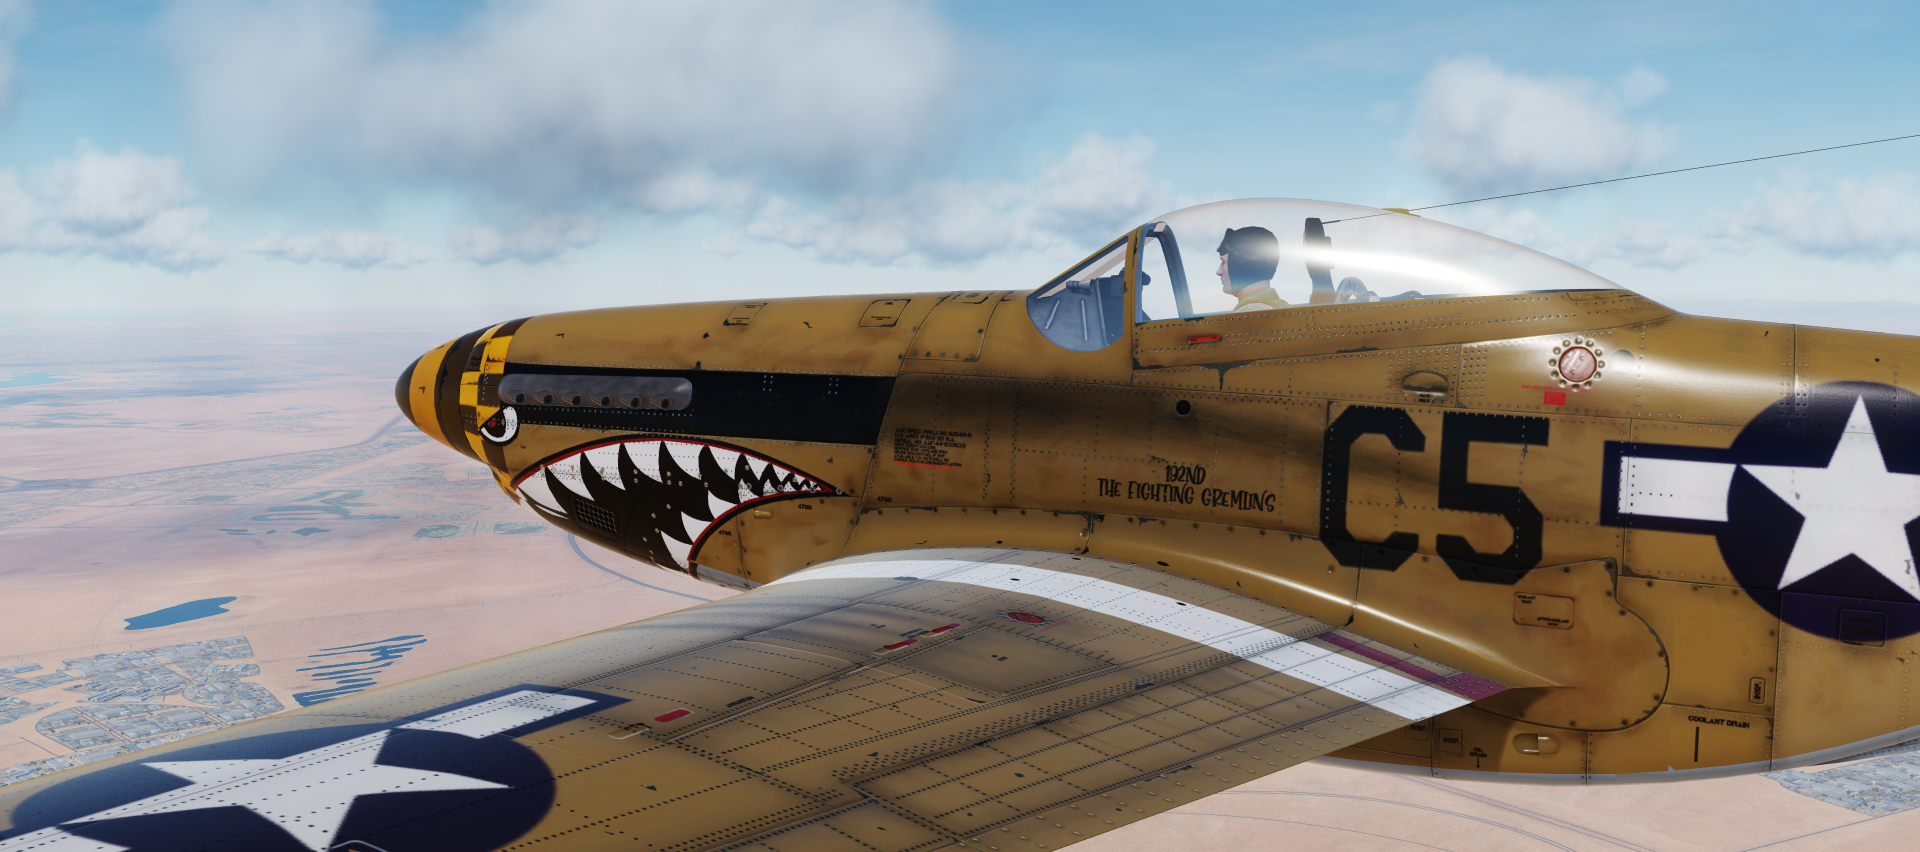 P-51D "192nd Fighting Gremlins" Syria map skin UPDATED